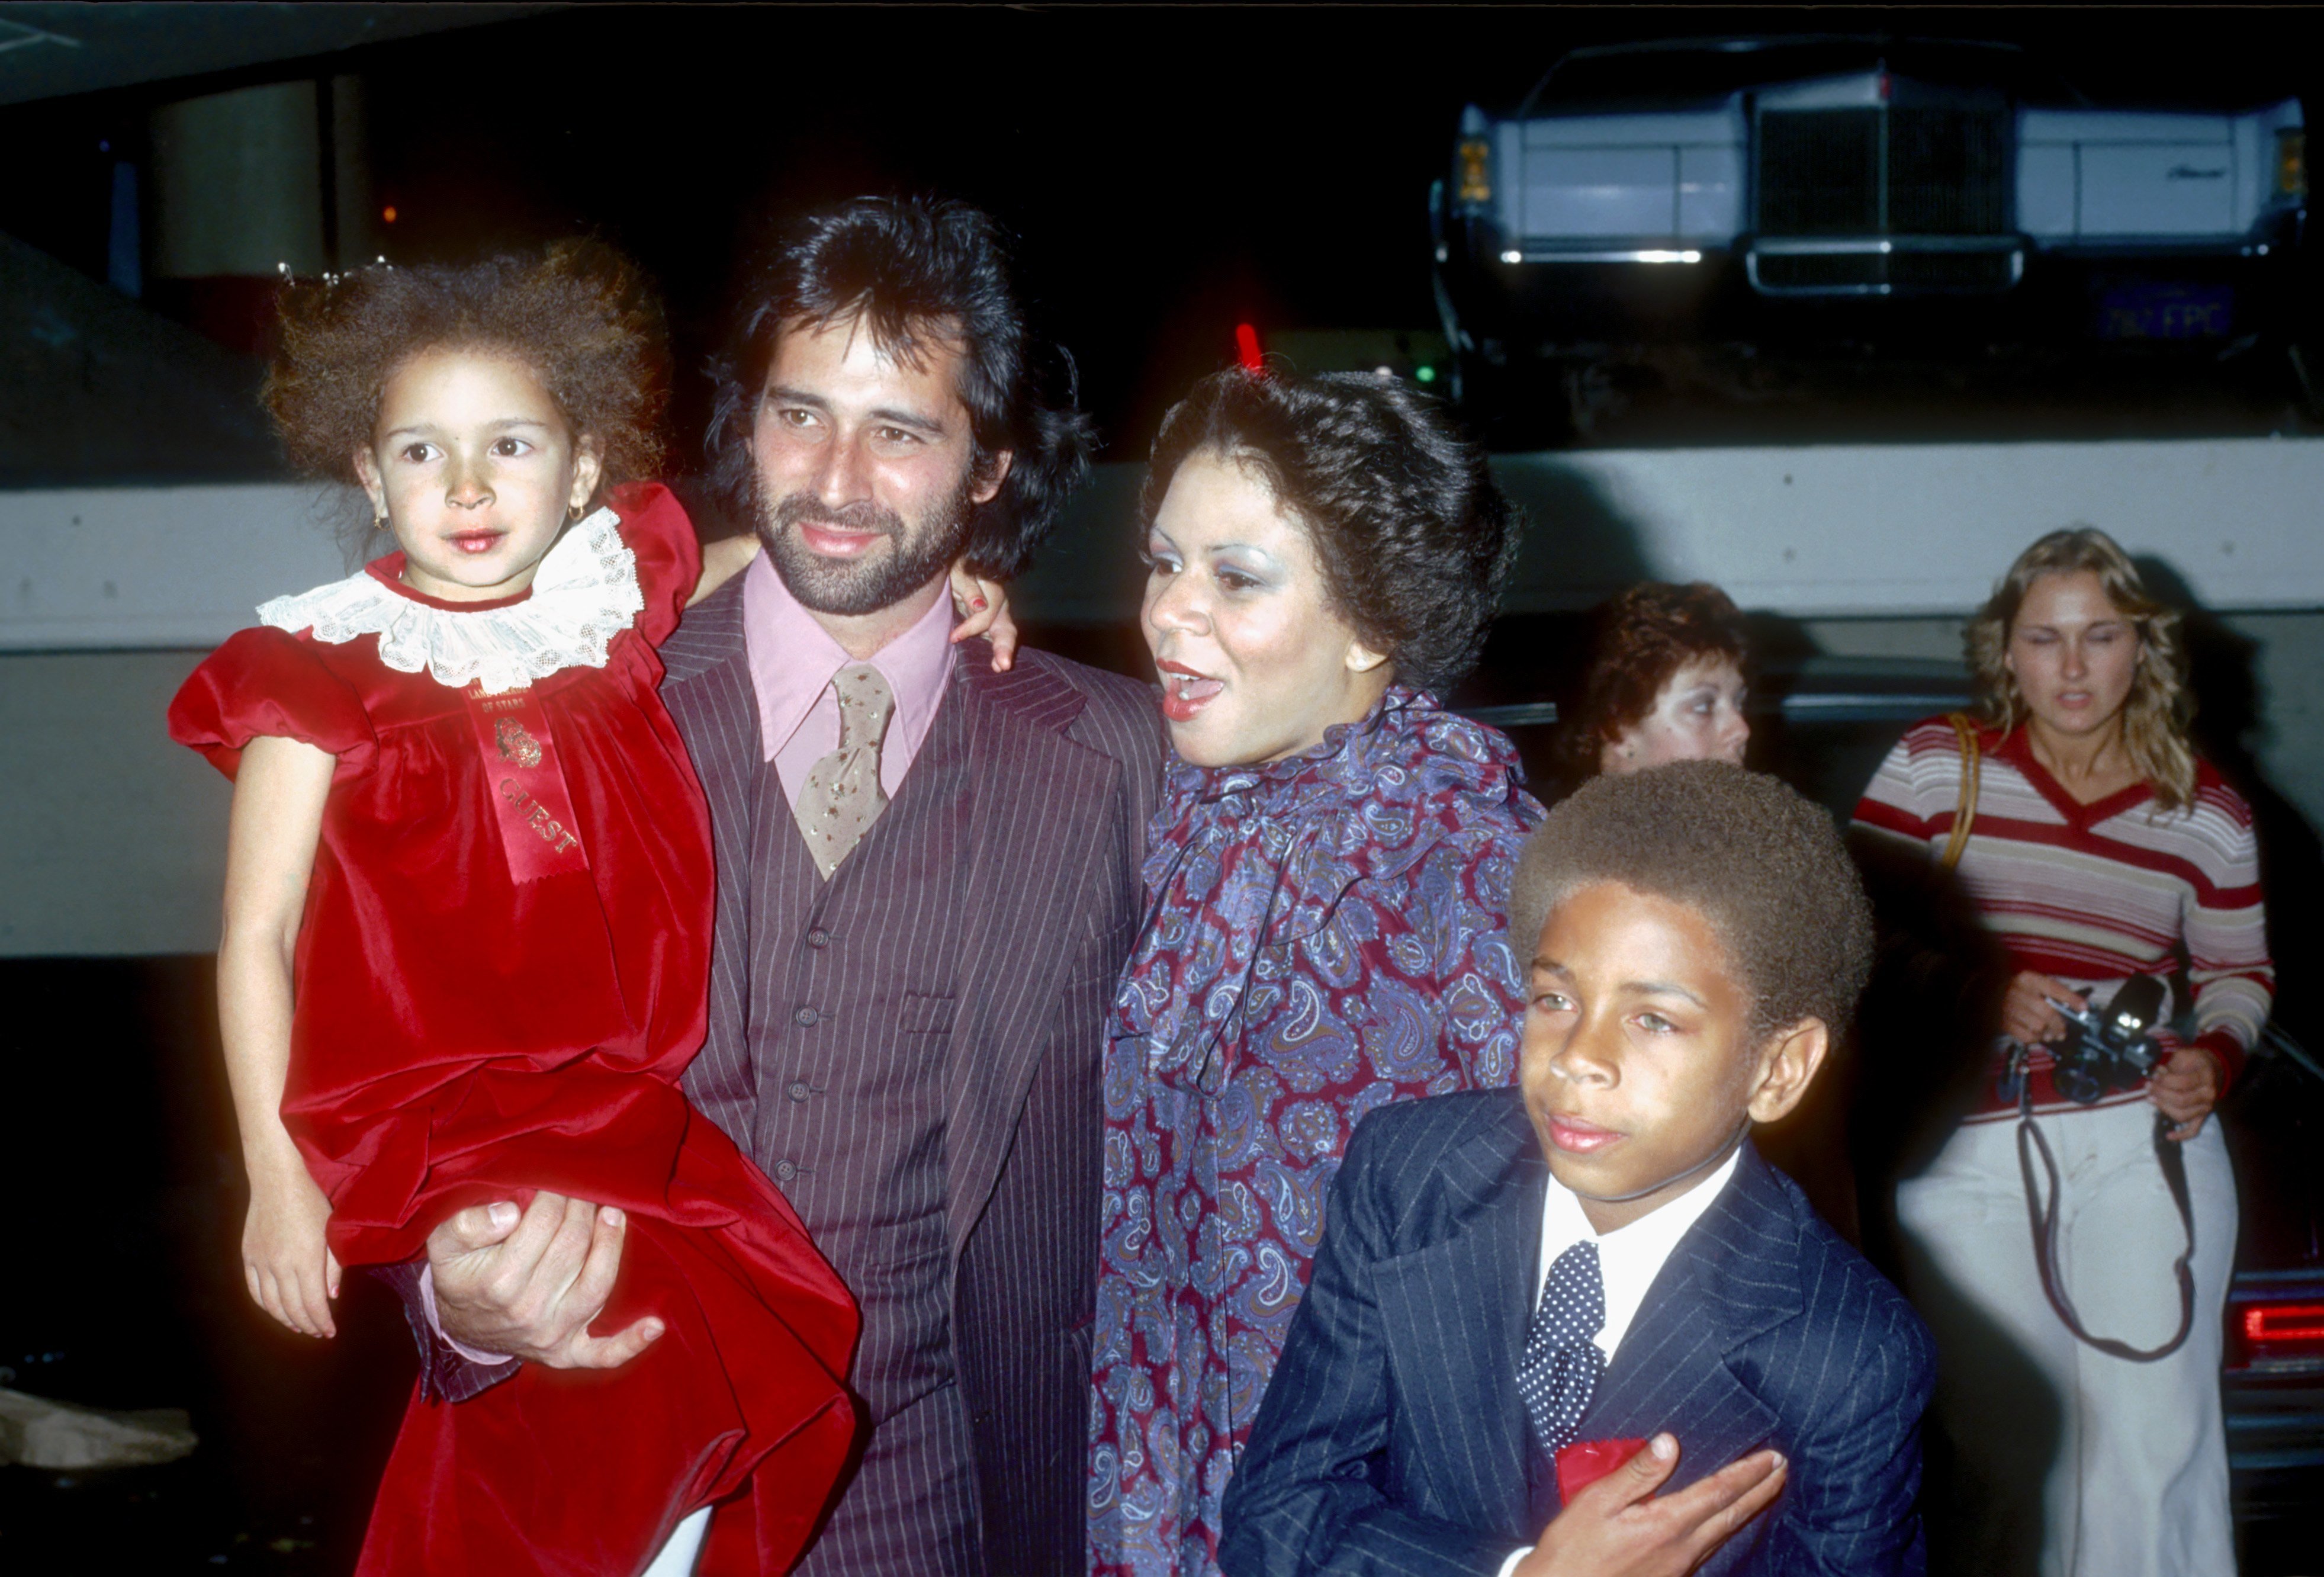 Singer Minnie Riperton, her husband Richard Rudolph and children Maya Rudolph and Marc Rudolph attend the Hollywood Christmas Parade in December 1978. | Photo: Getty Images